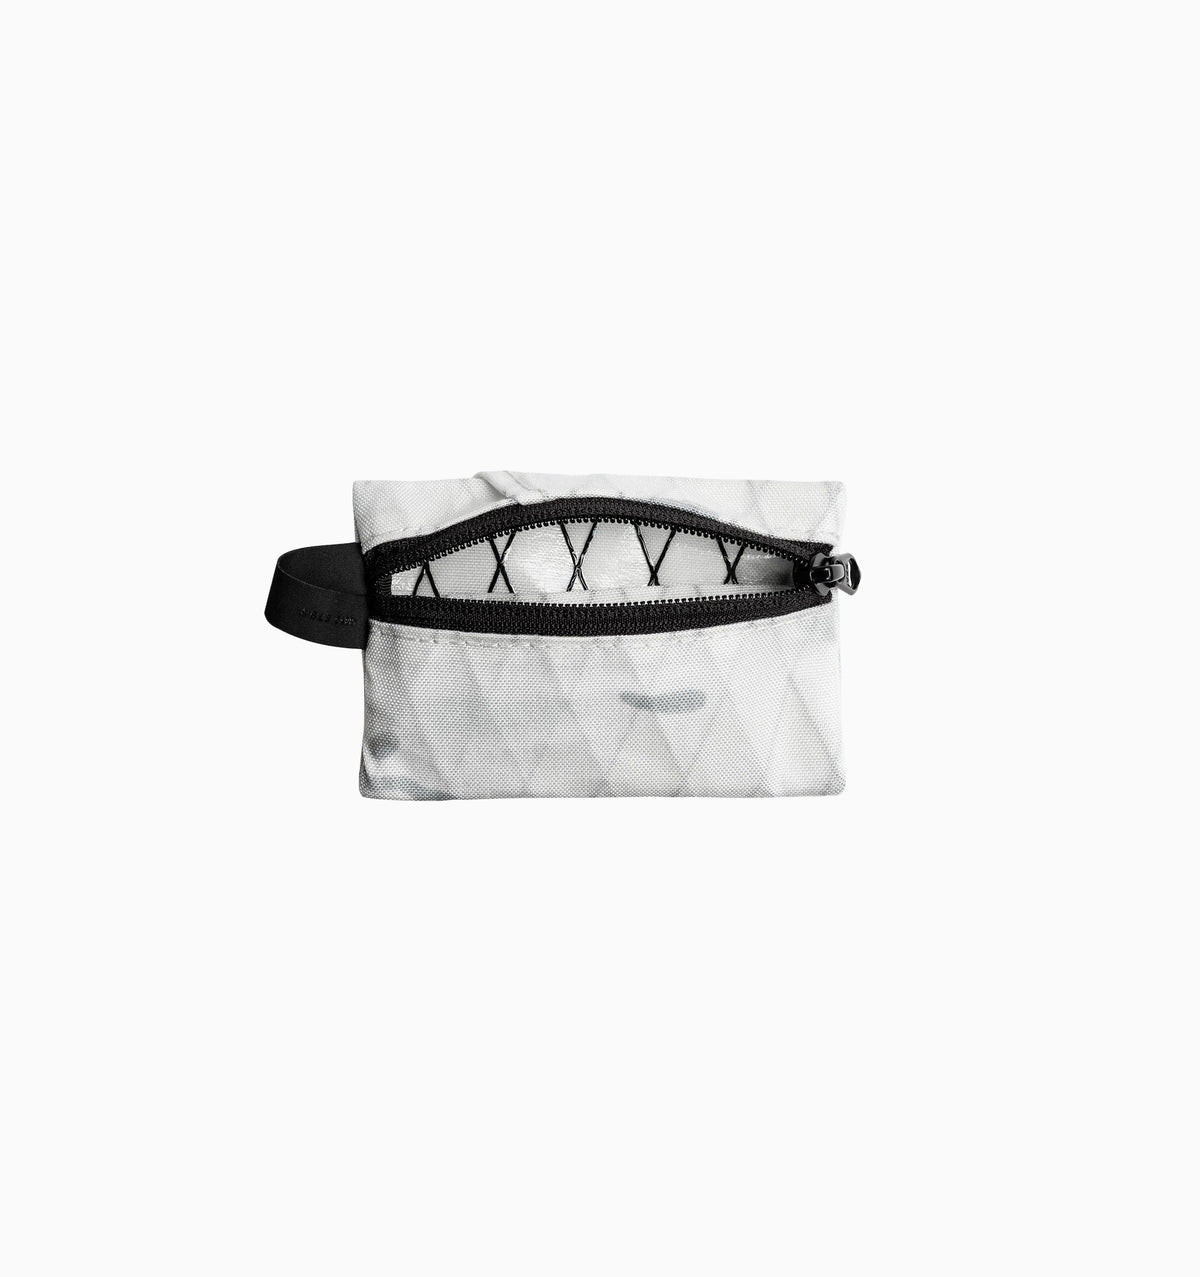 Able Carry Joey Pouch X-Pac - White Alpine